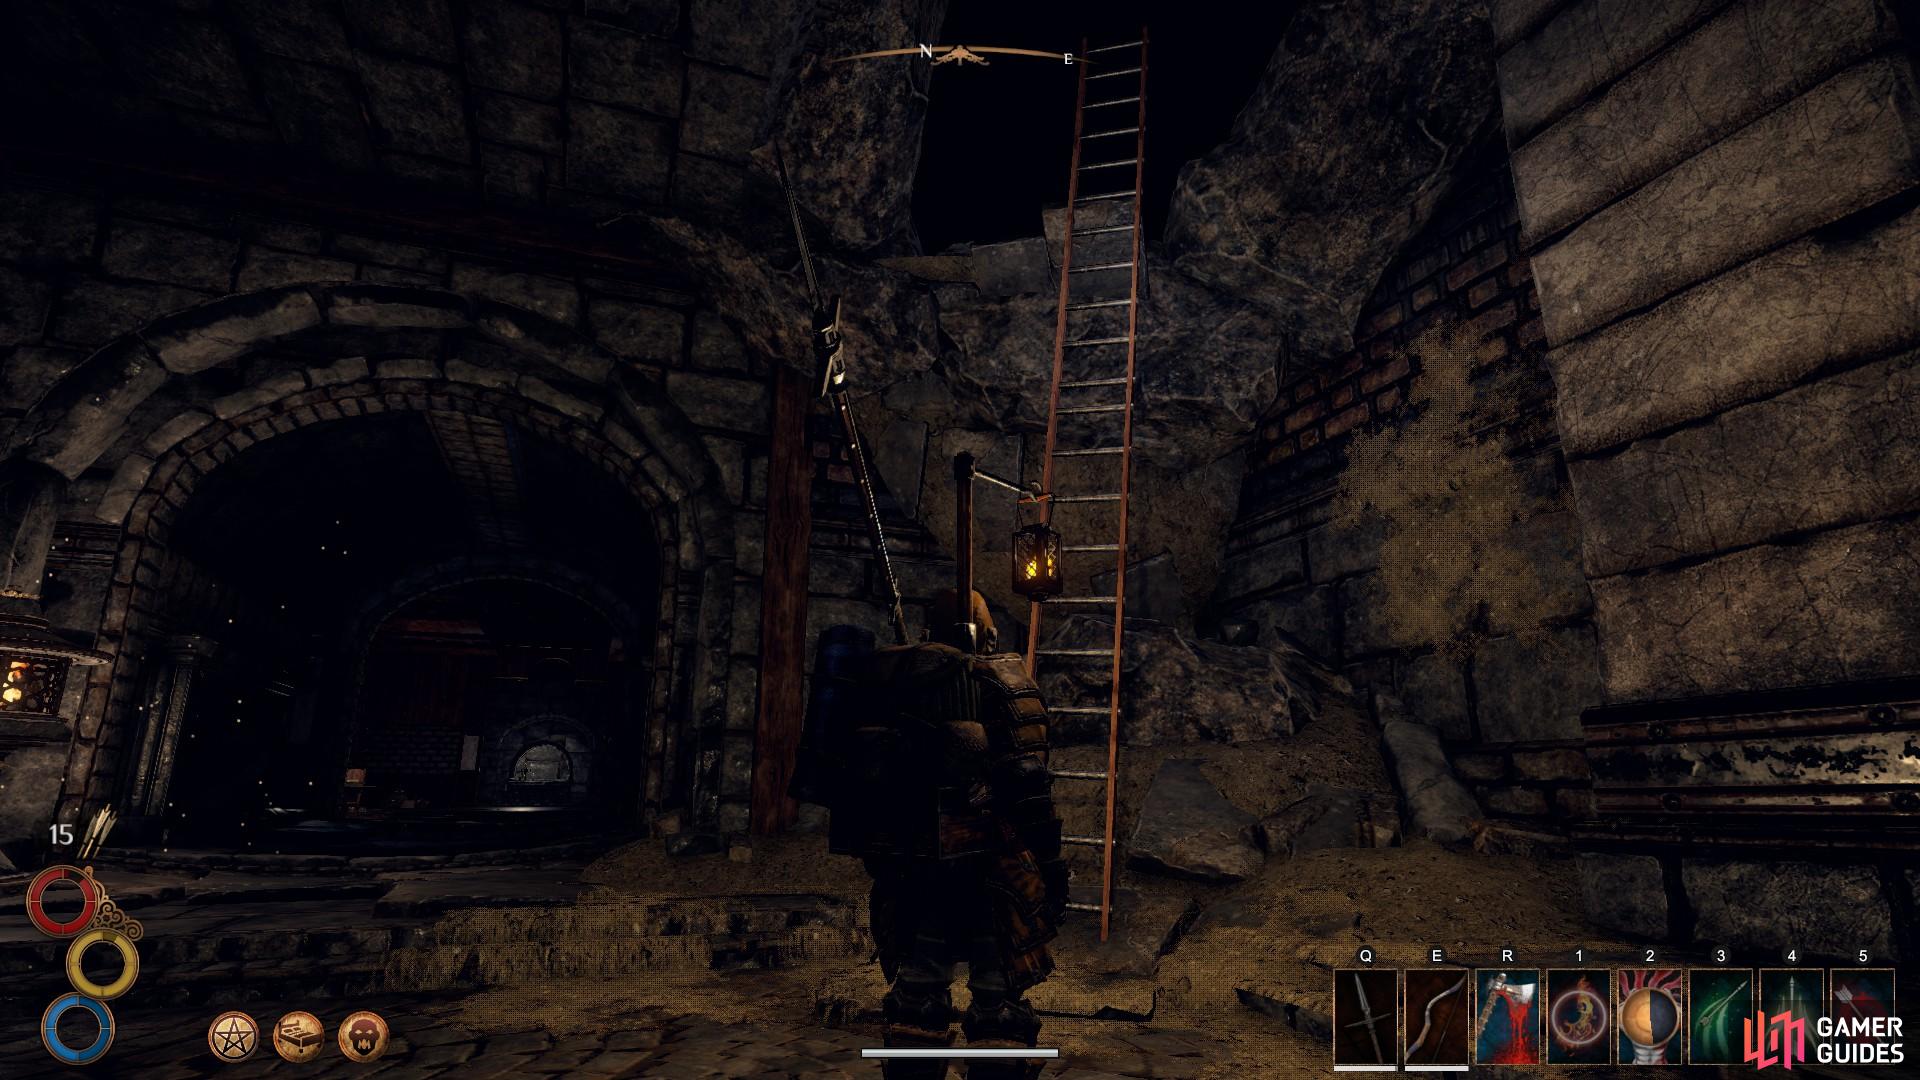 Climb the ladder to enter the Ancestor’s Resting Place.